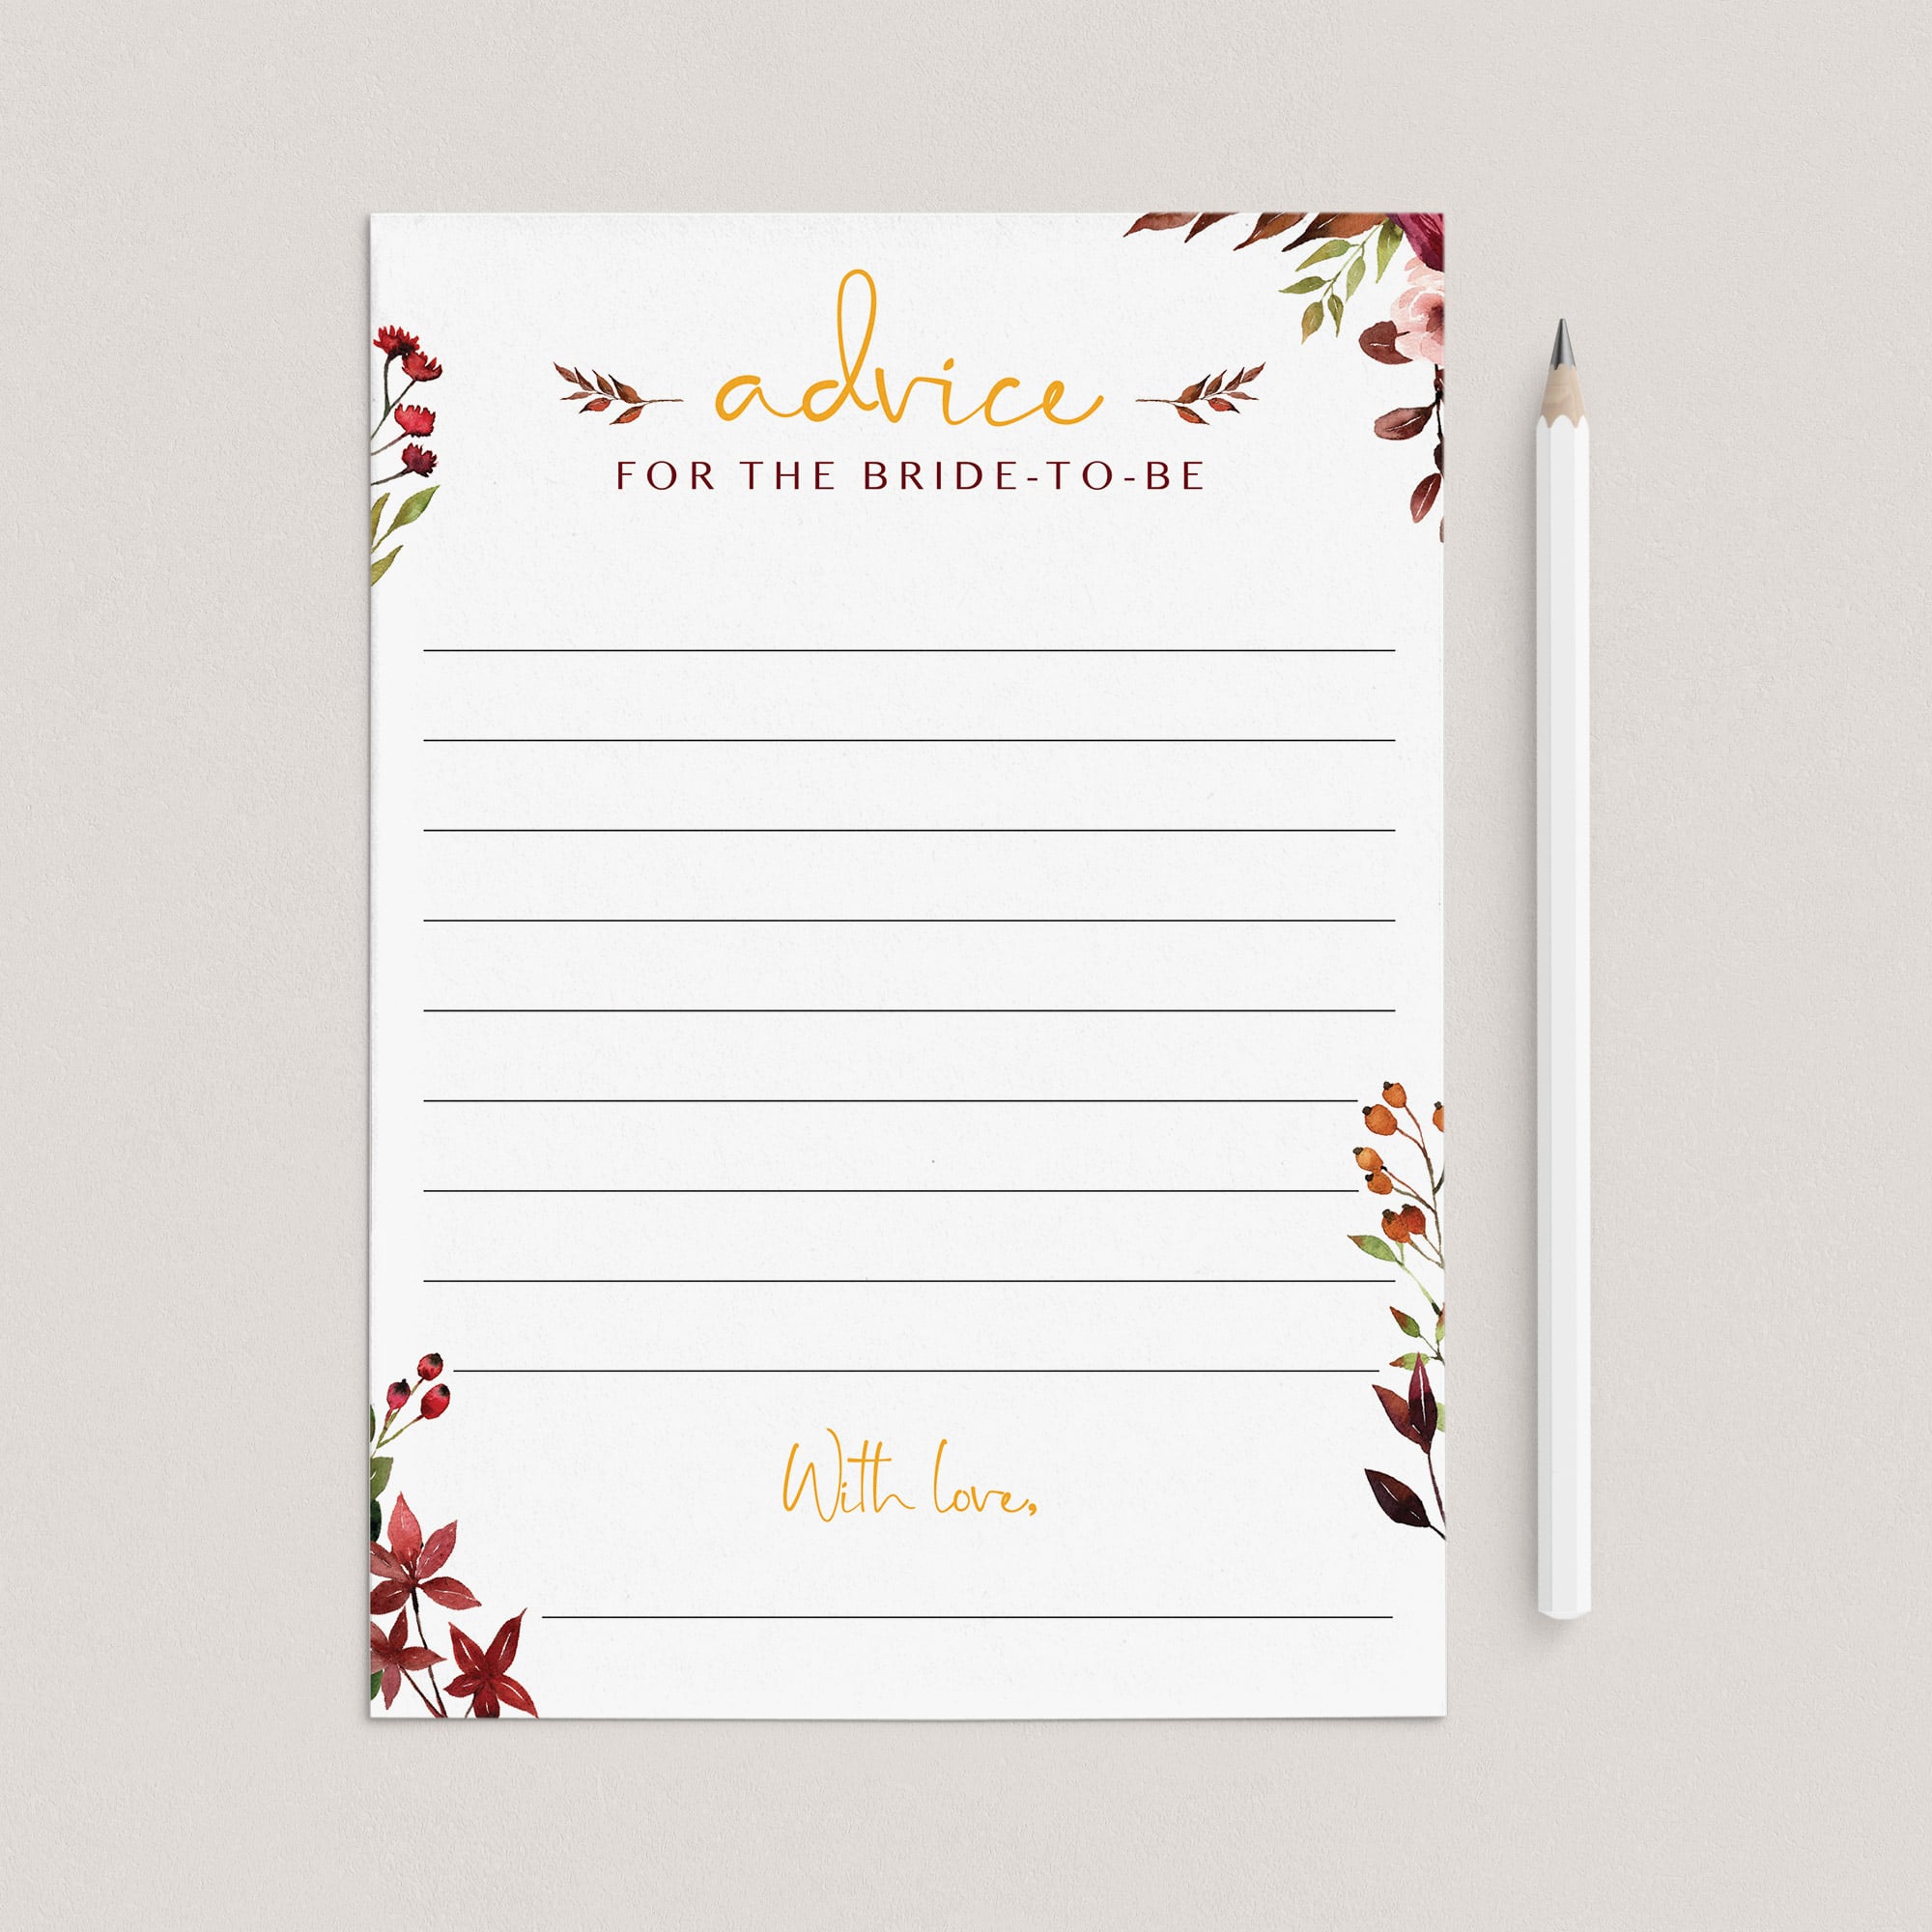 Red floral bridal shower advice cards printable by LittleSizzle